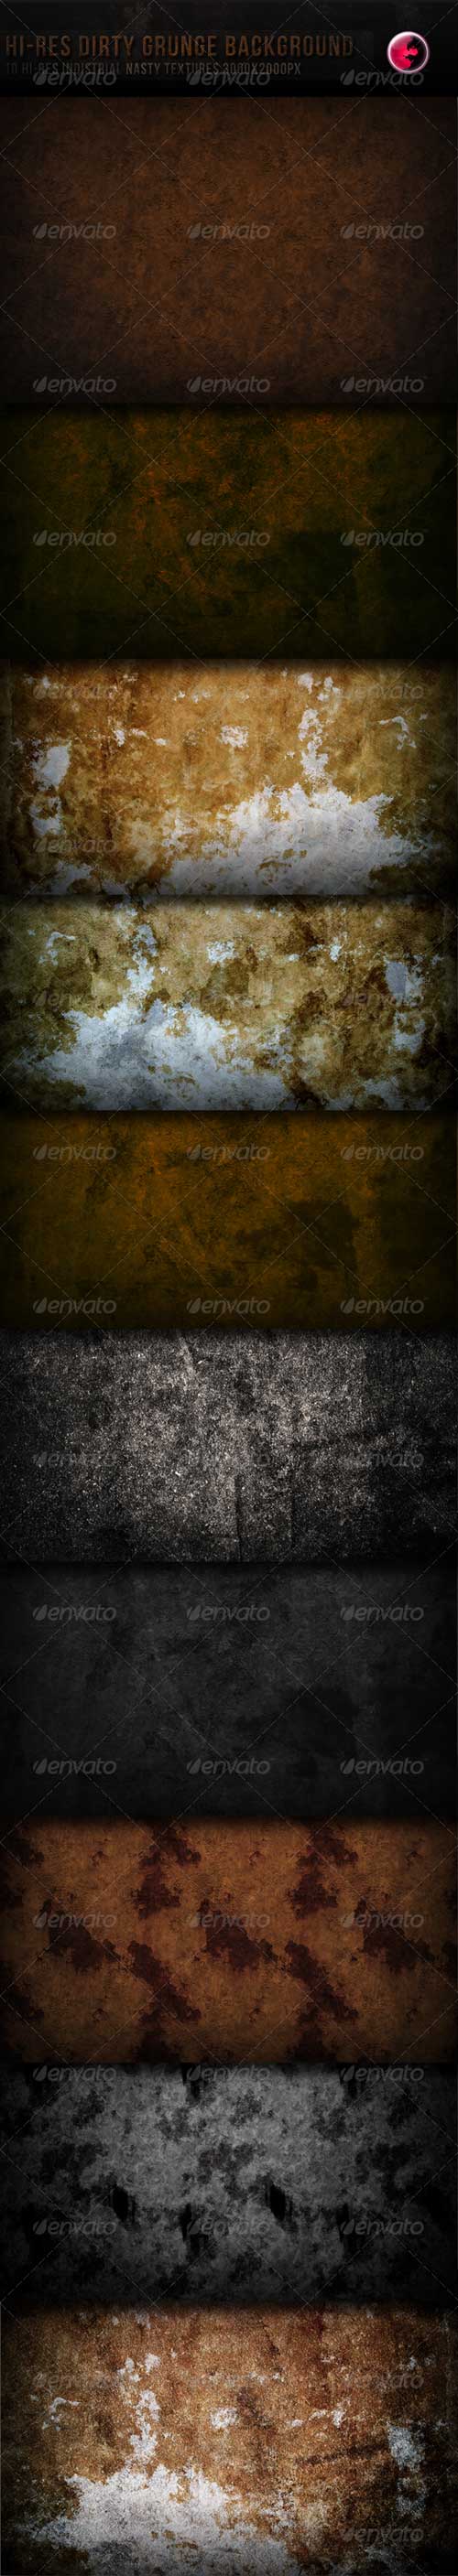 10 Hi-res Dirty Grunge Texture/Background